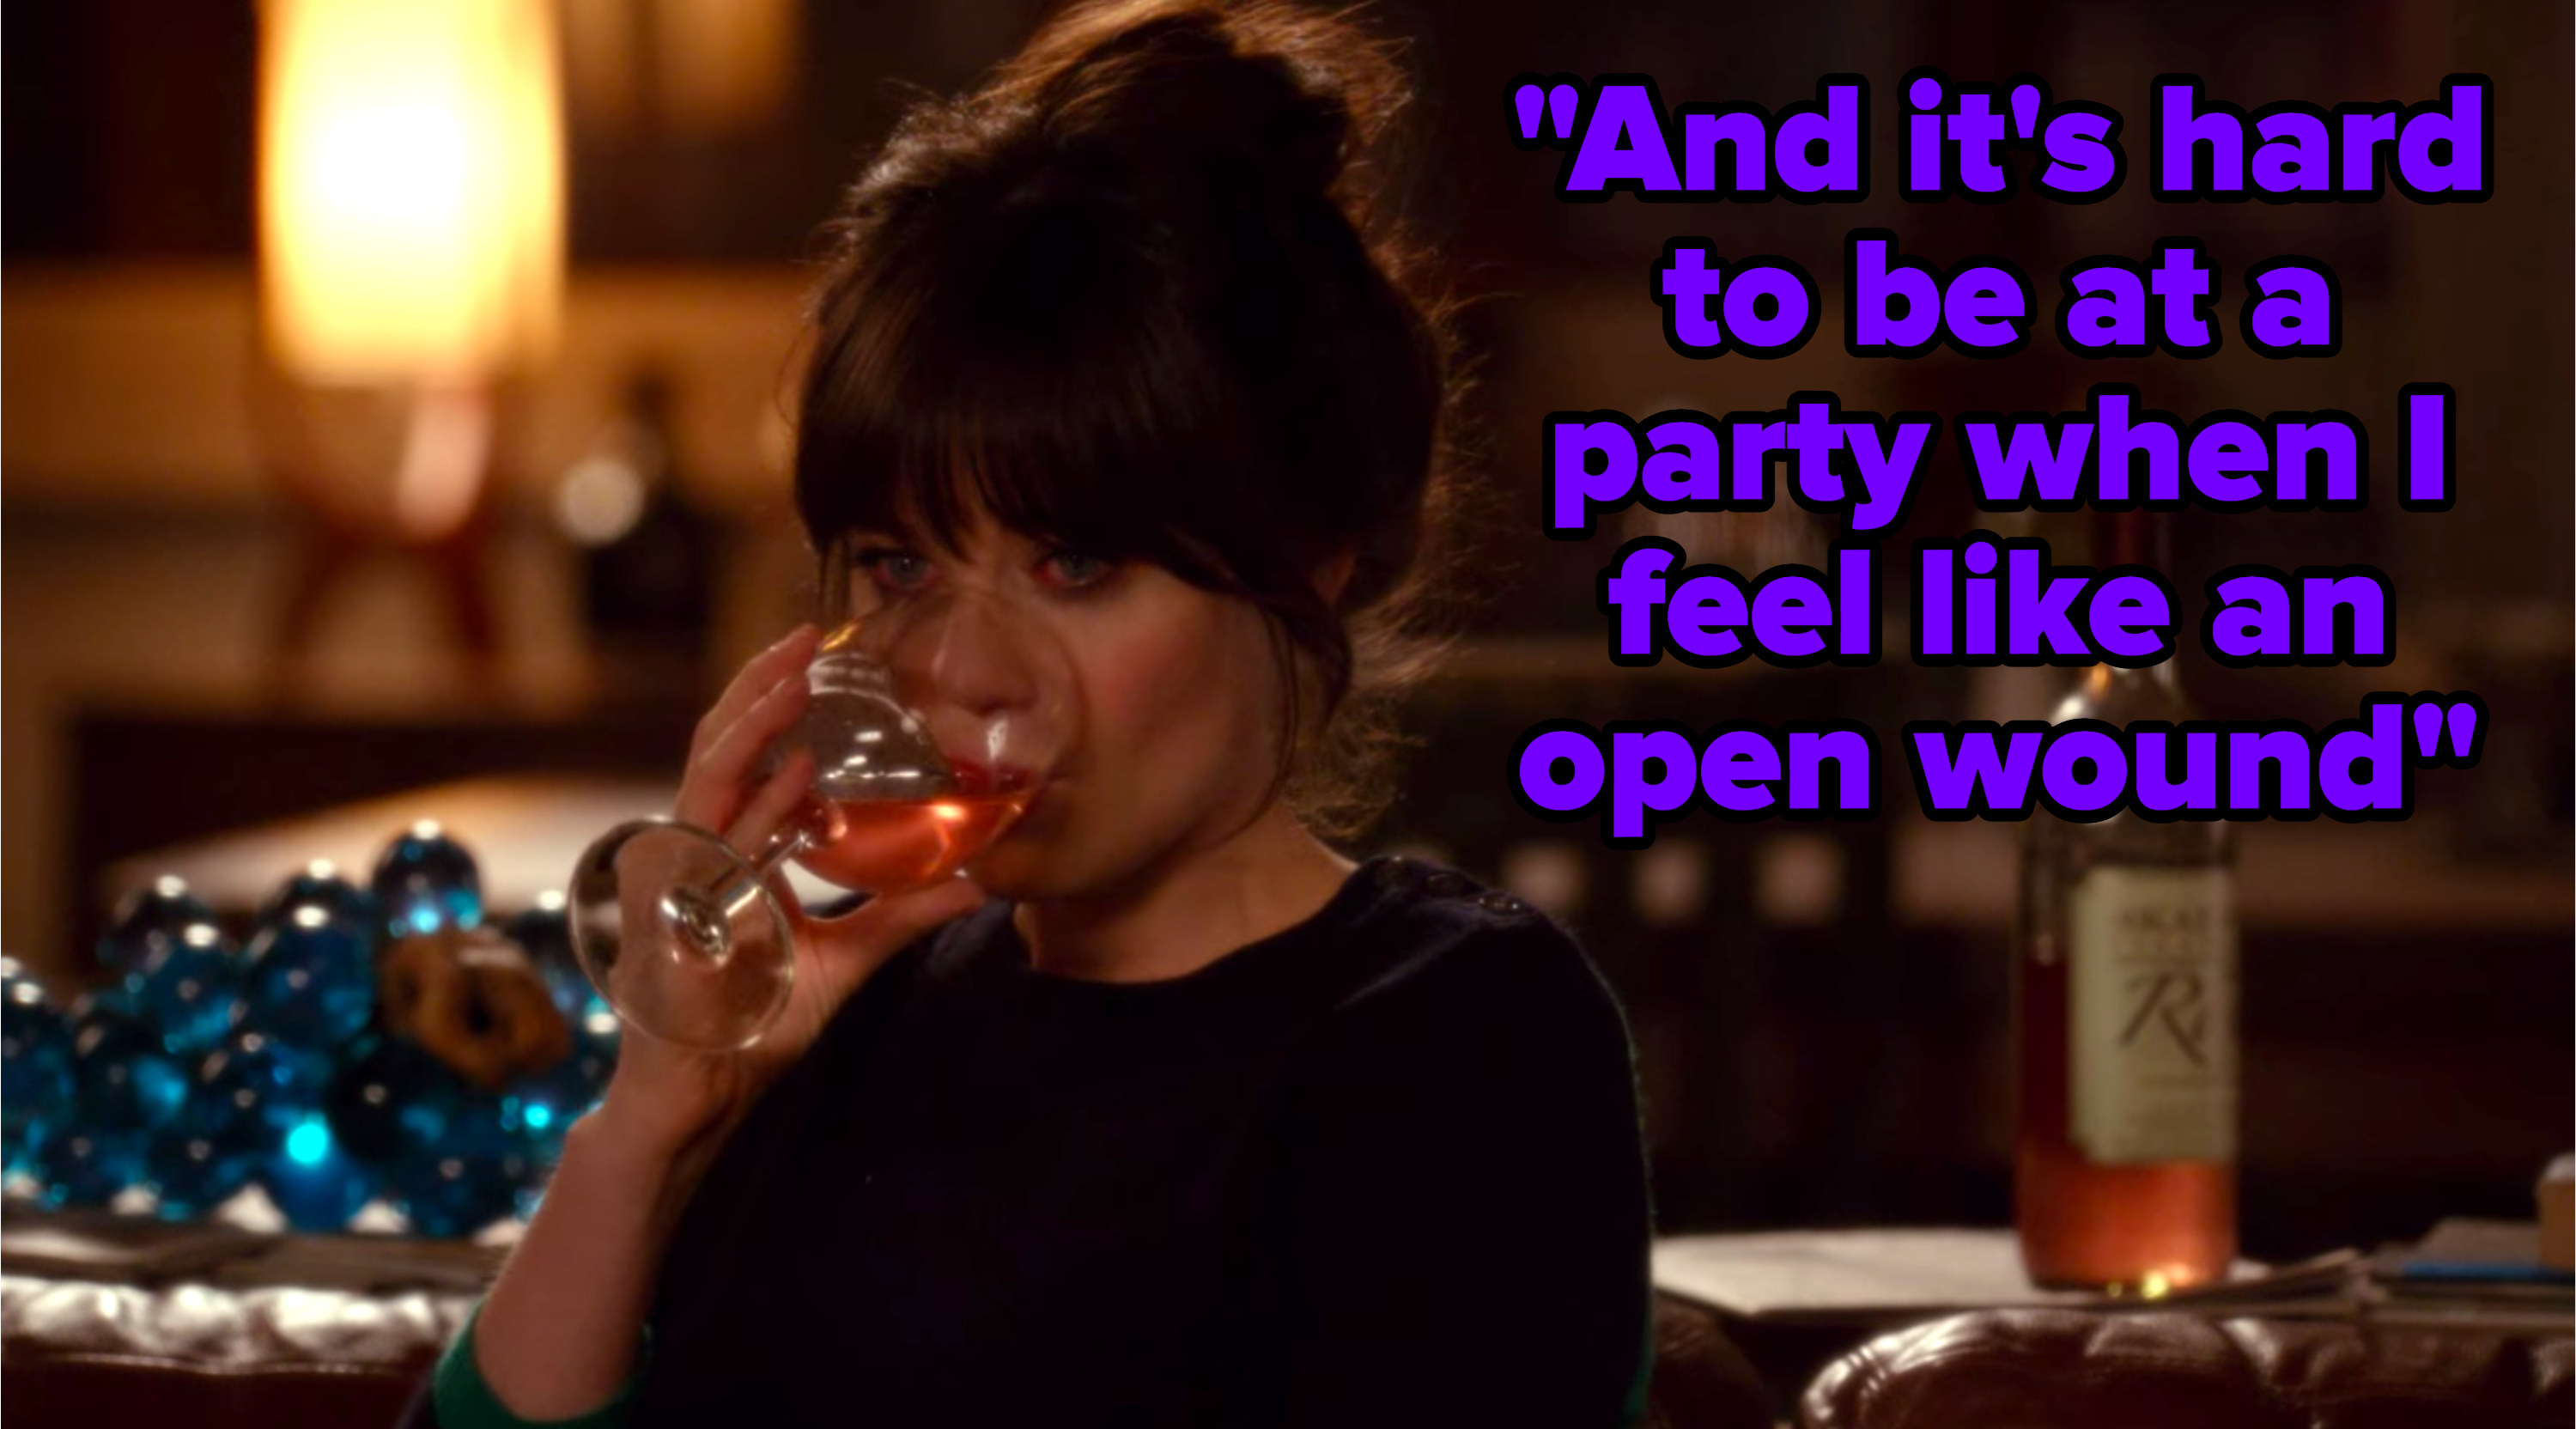 &quot;And it&#x27;s hard to be at a party when I feel like an open wound&quot; written over Jess from &quot;New Girl&quot; crying while drinking rosé